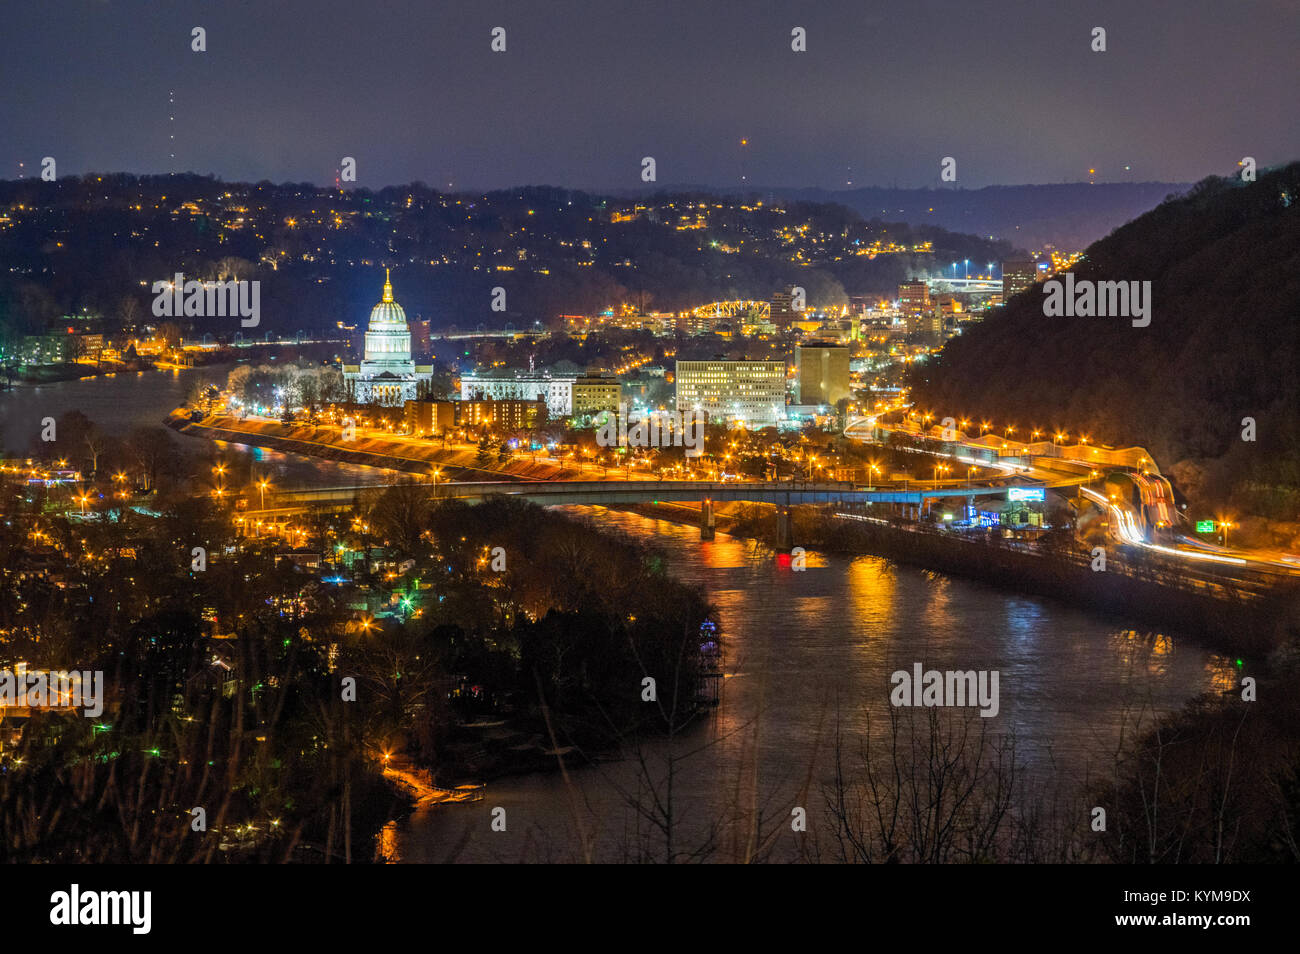 City lights reflect off the Kanawha River at night leading to the Capitol Building of Charleston, West Virginia. Stock Photo